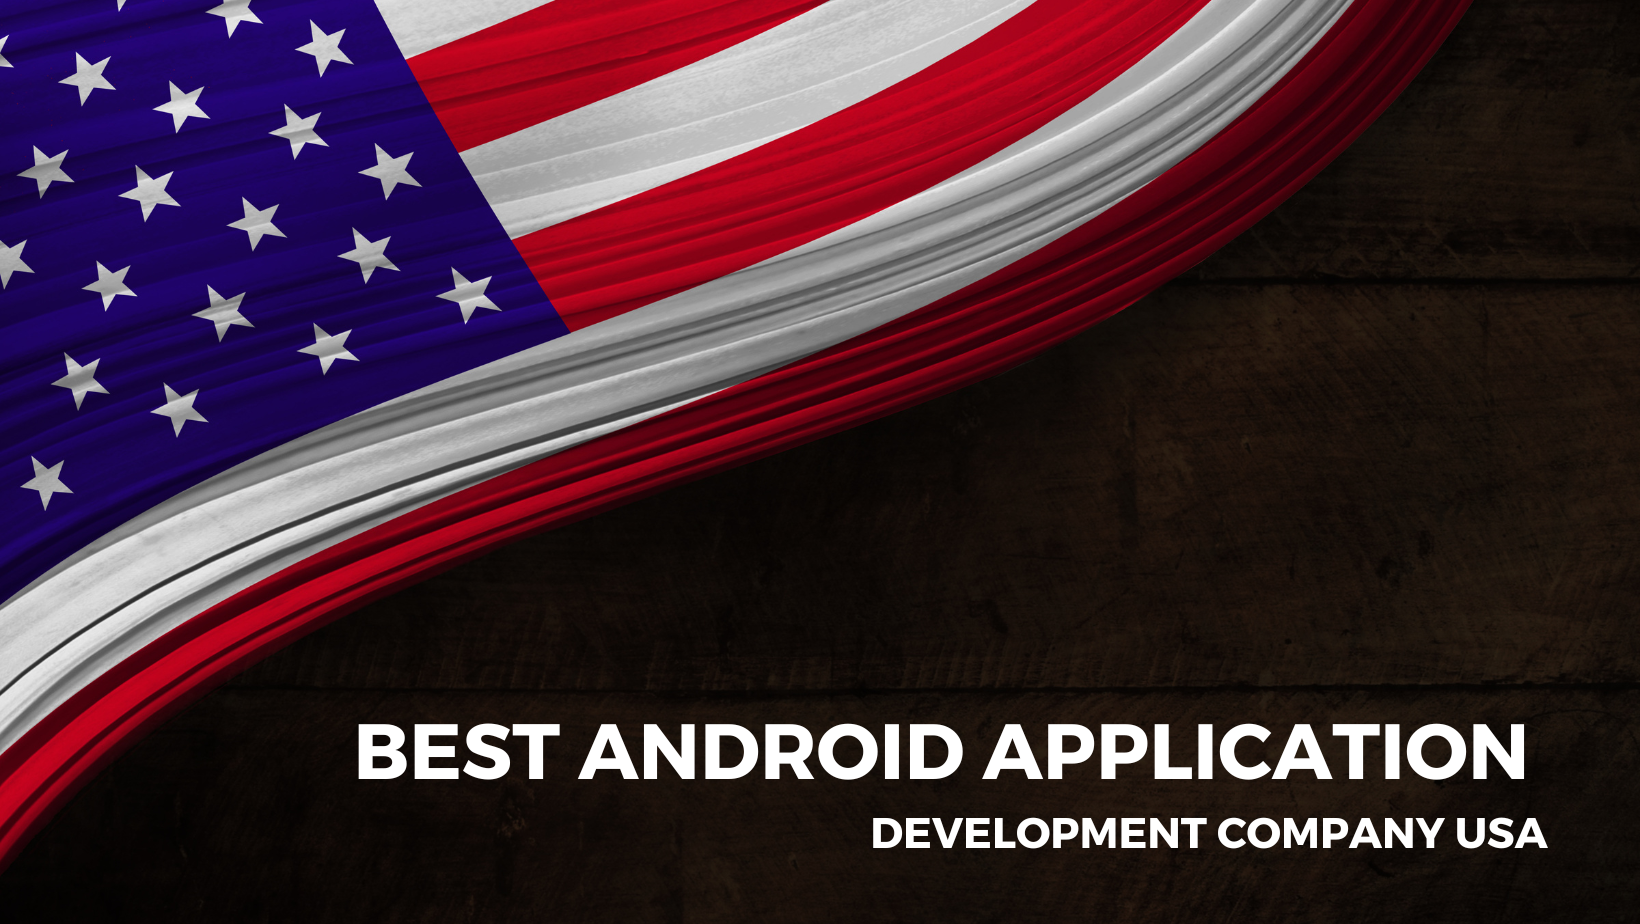 Best Android Application Development Company USA